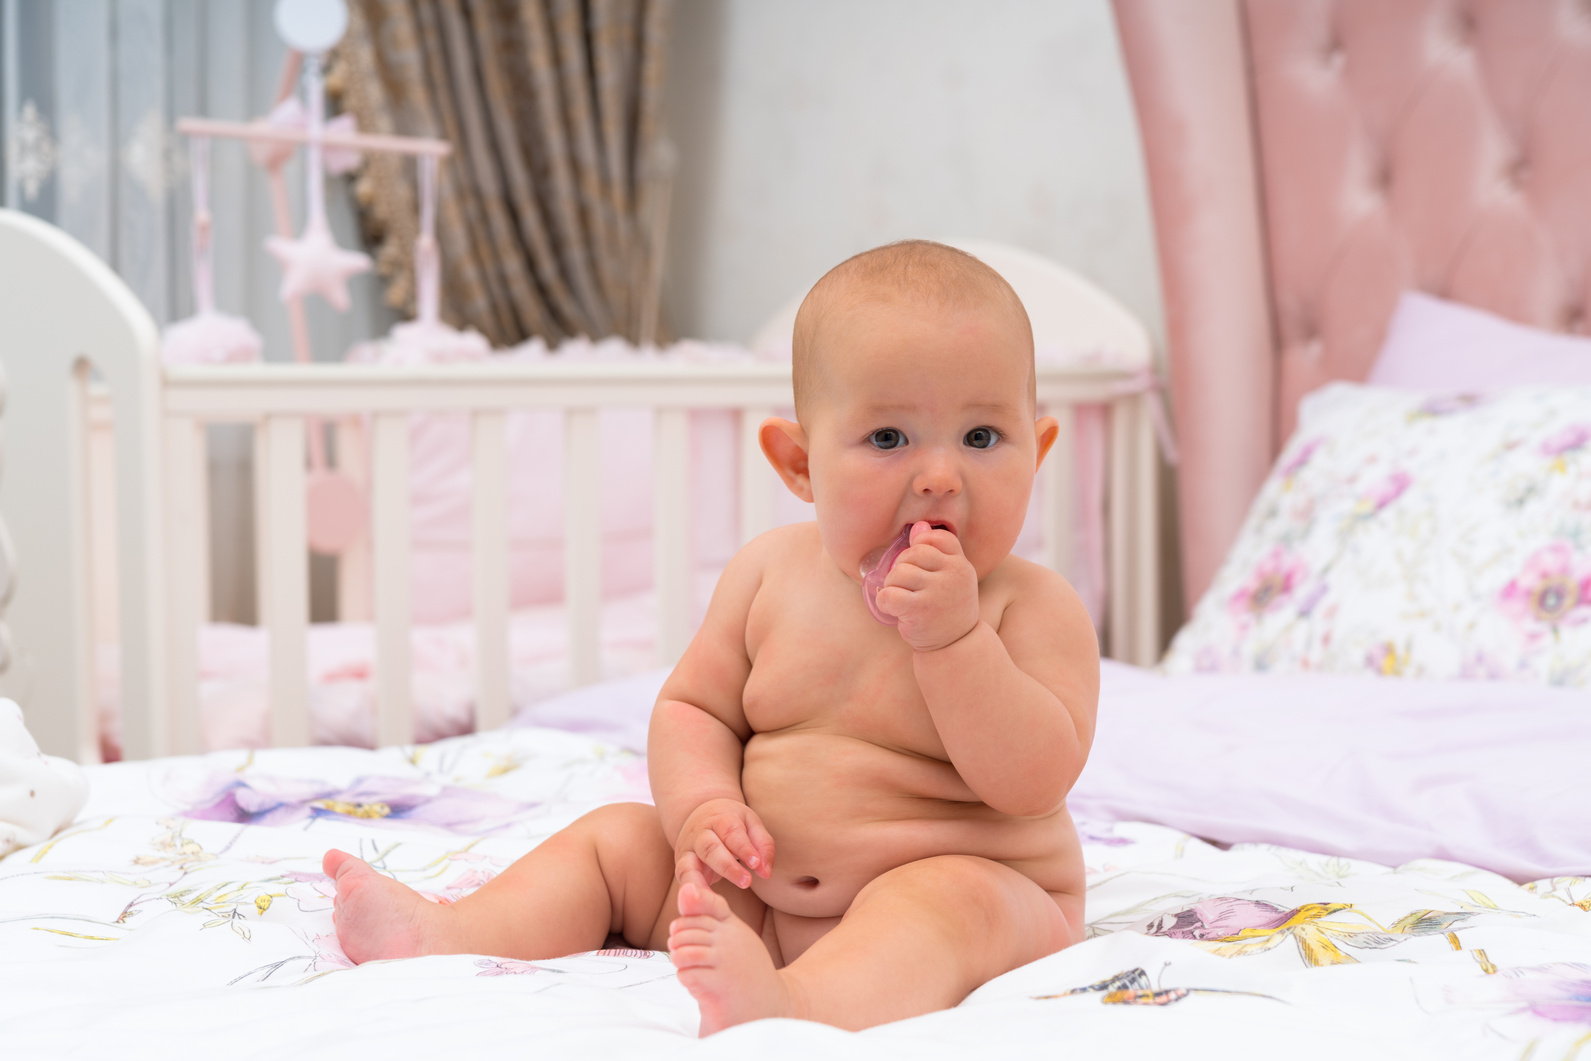 Chubby Naked Baby in Pink Room Looking at Camera